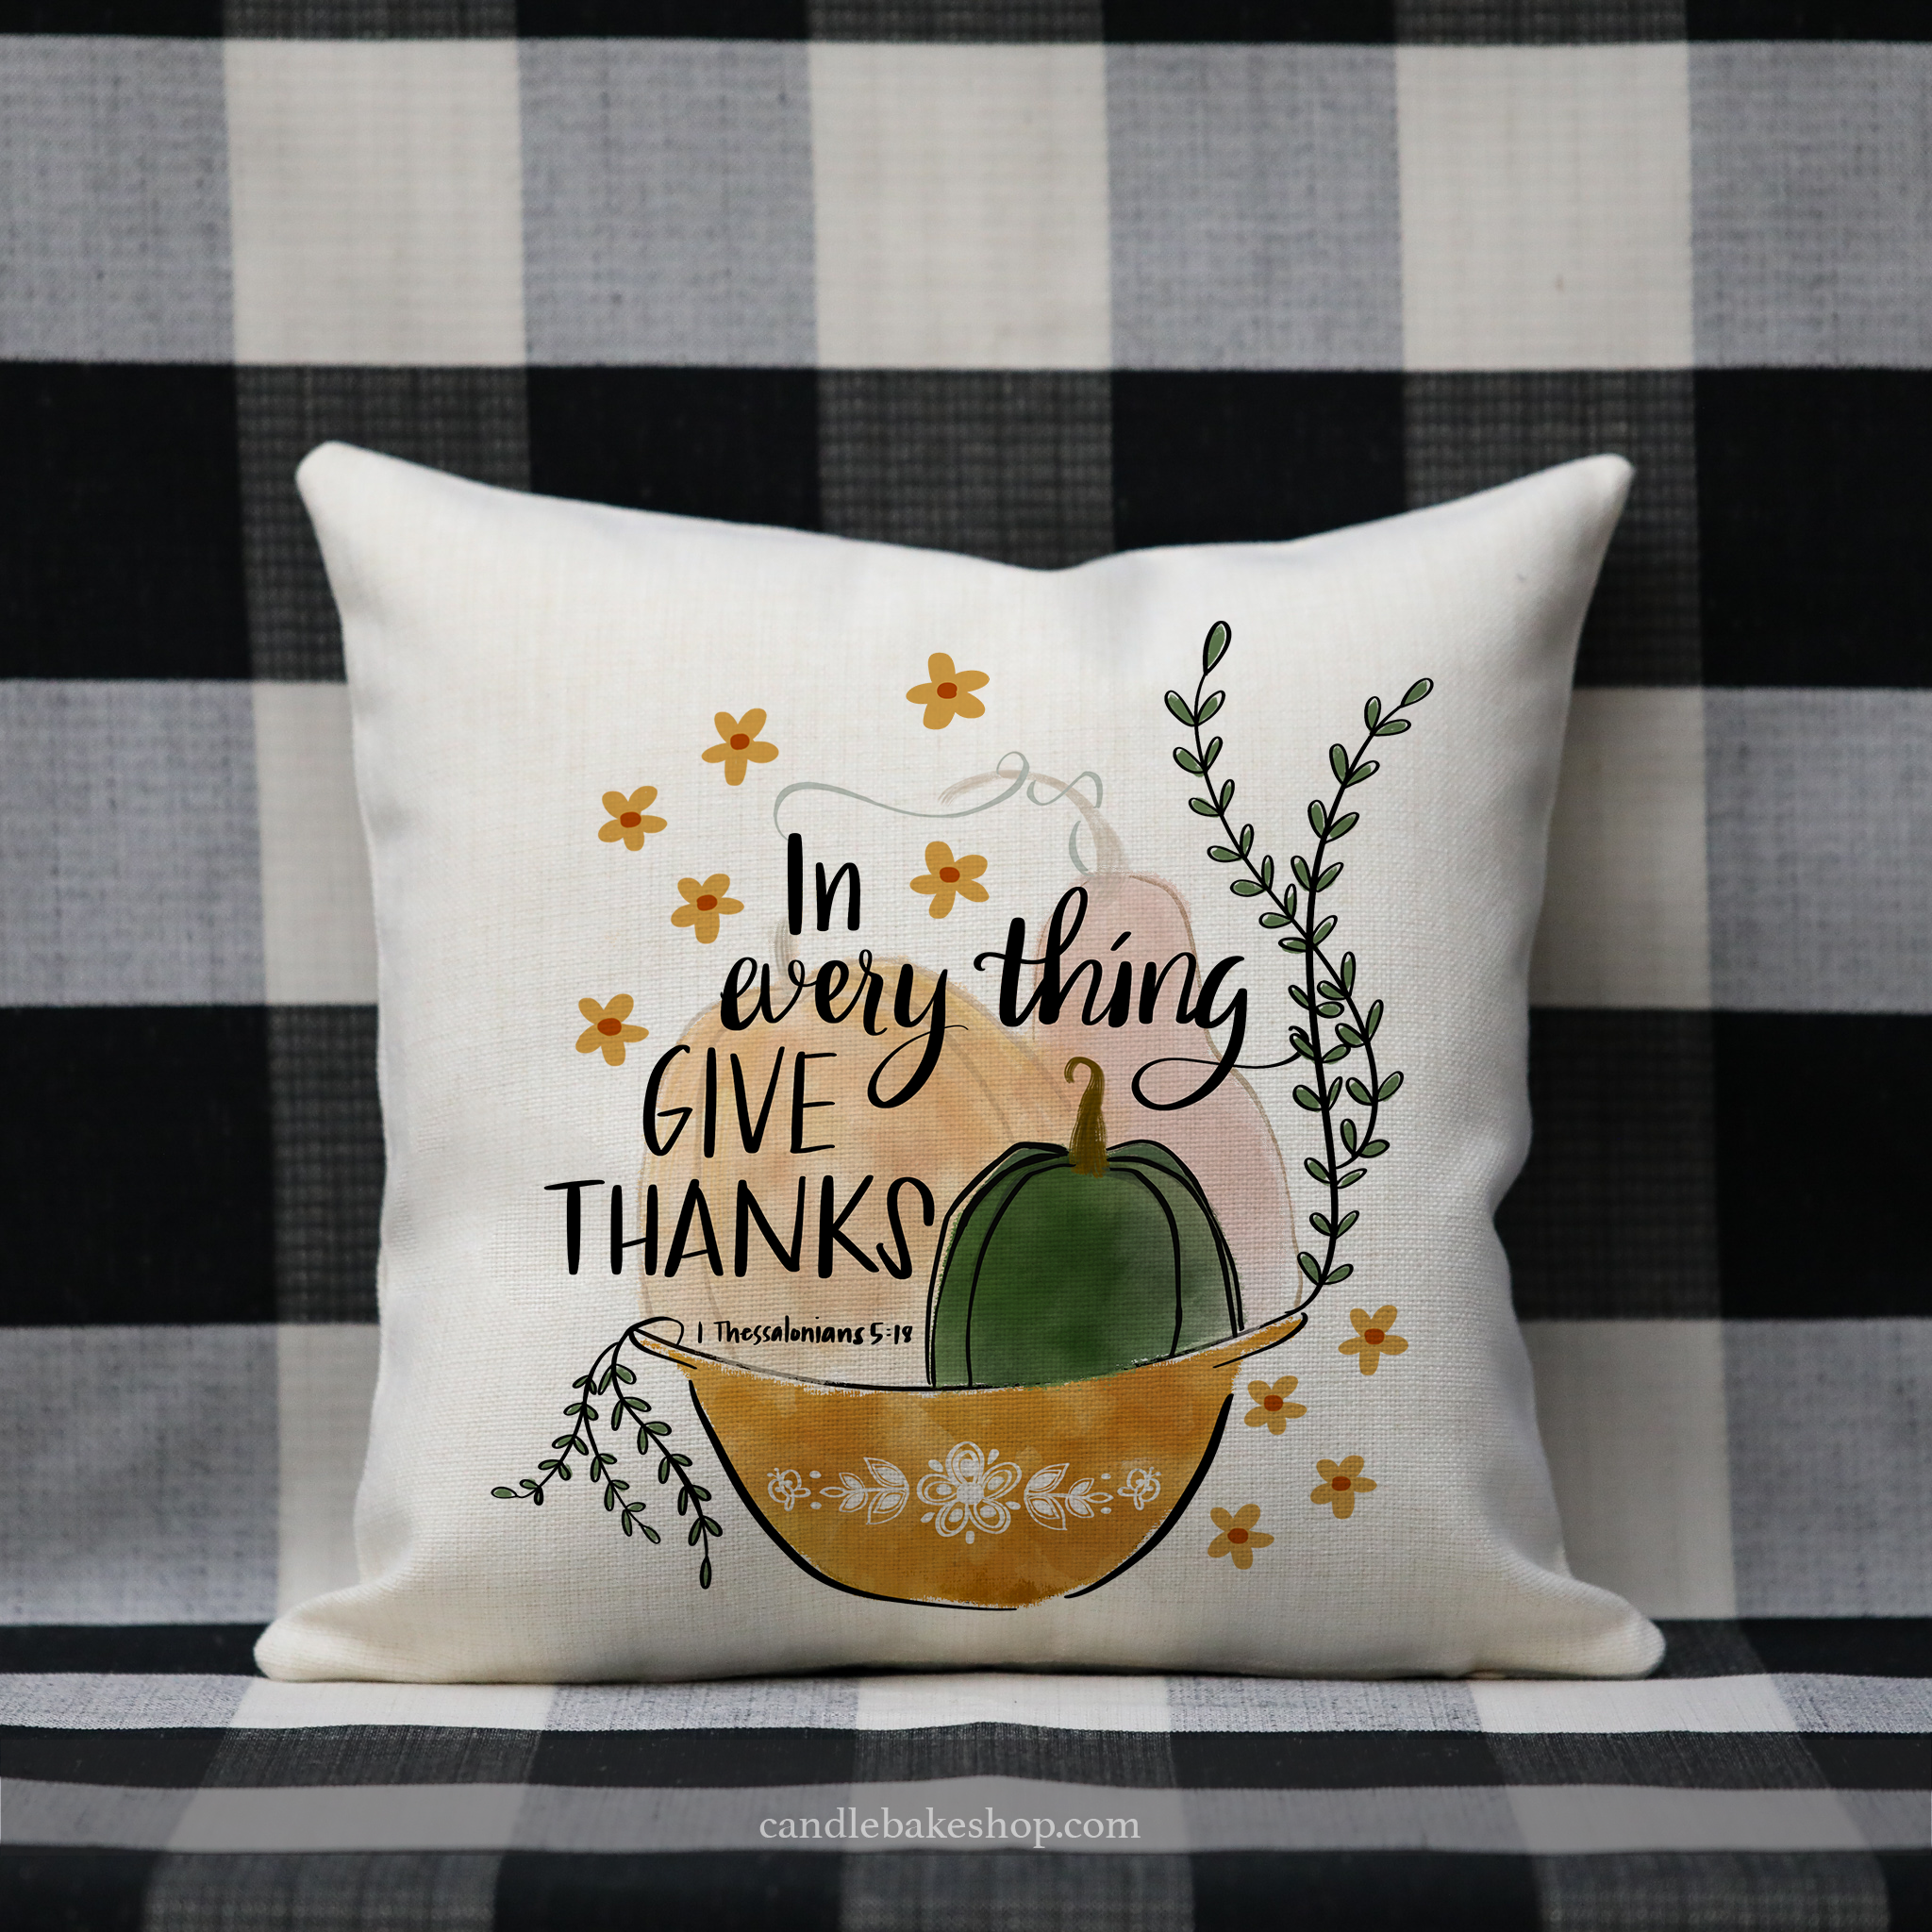 Vintage Inspired Scripture Pillow - "In Every Thing Give Thanks"